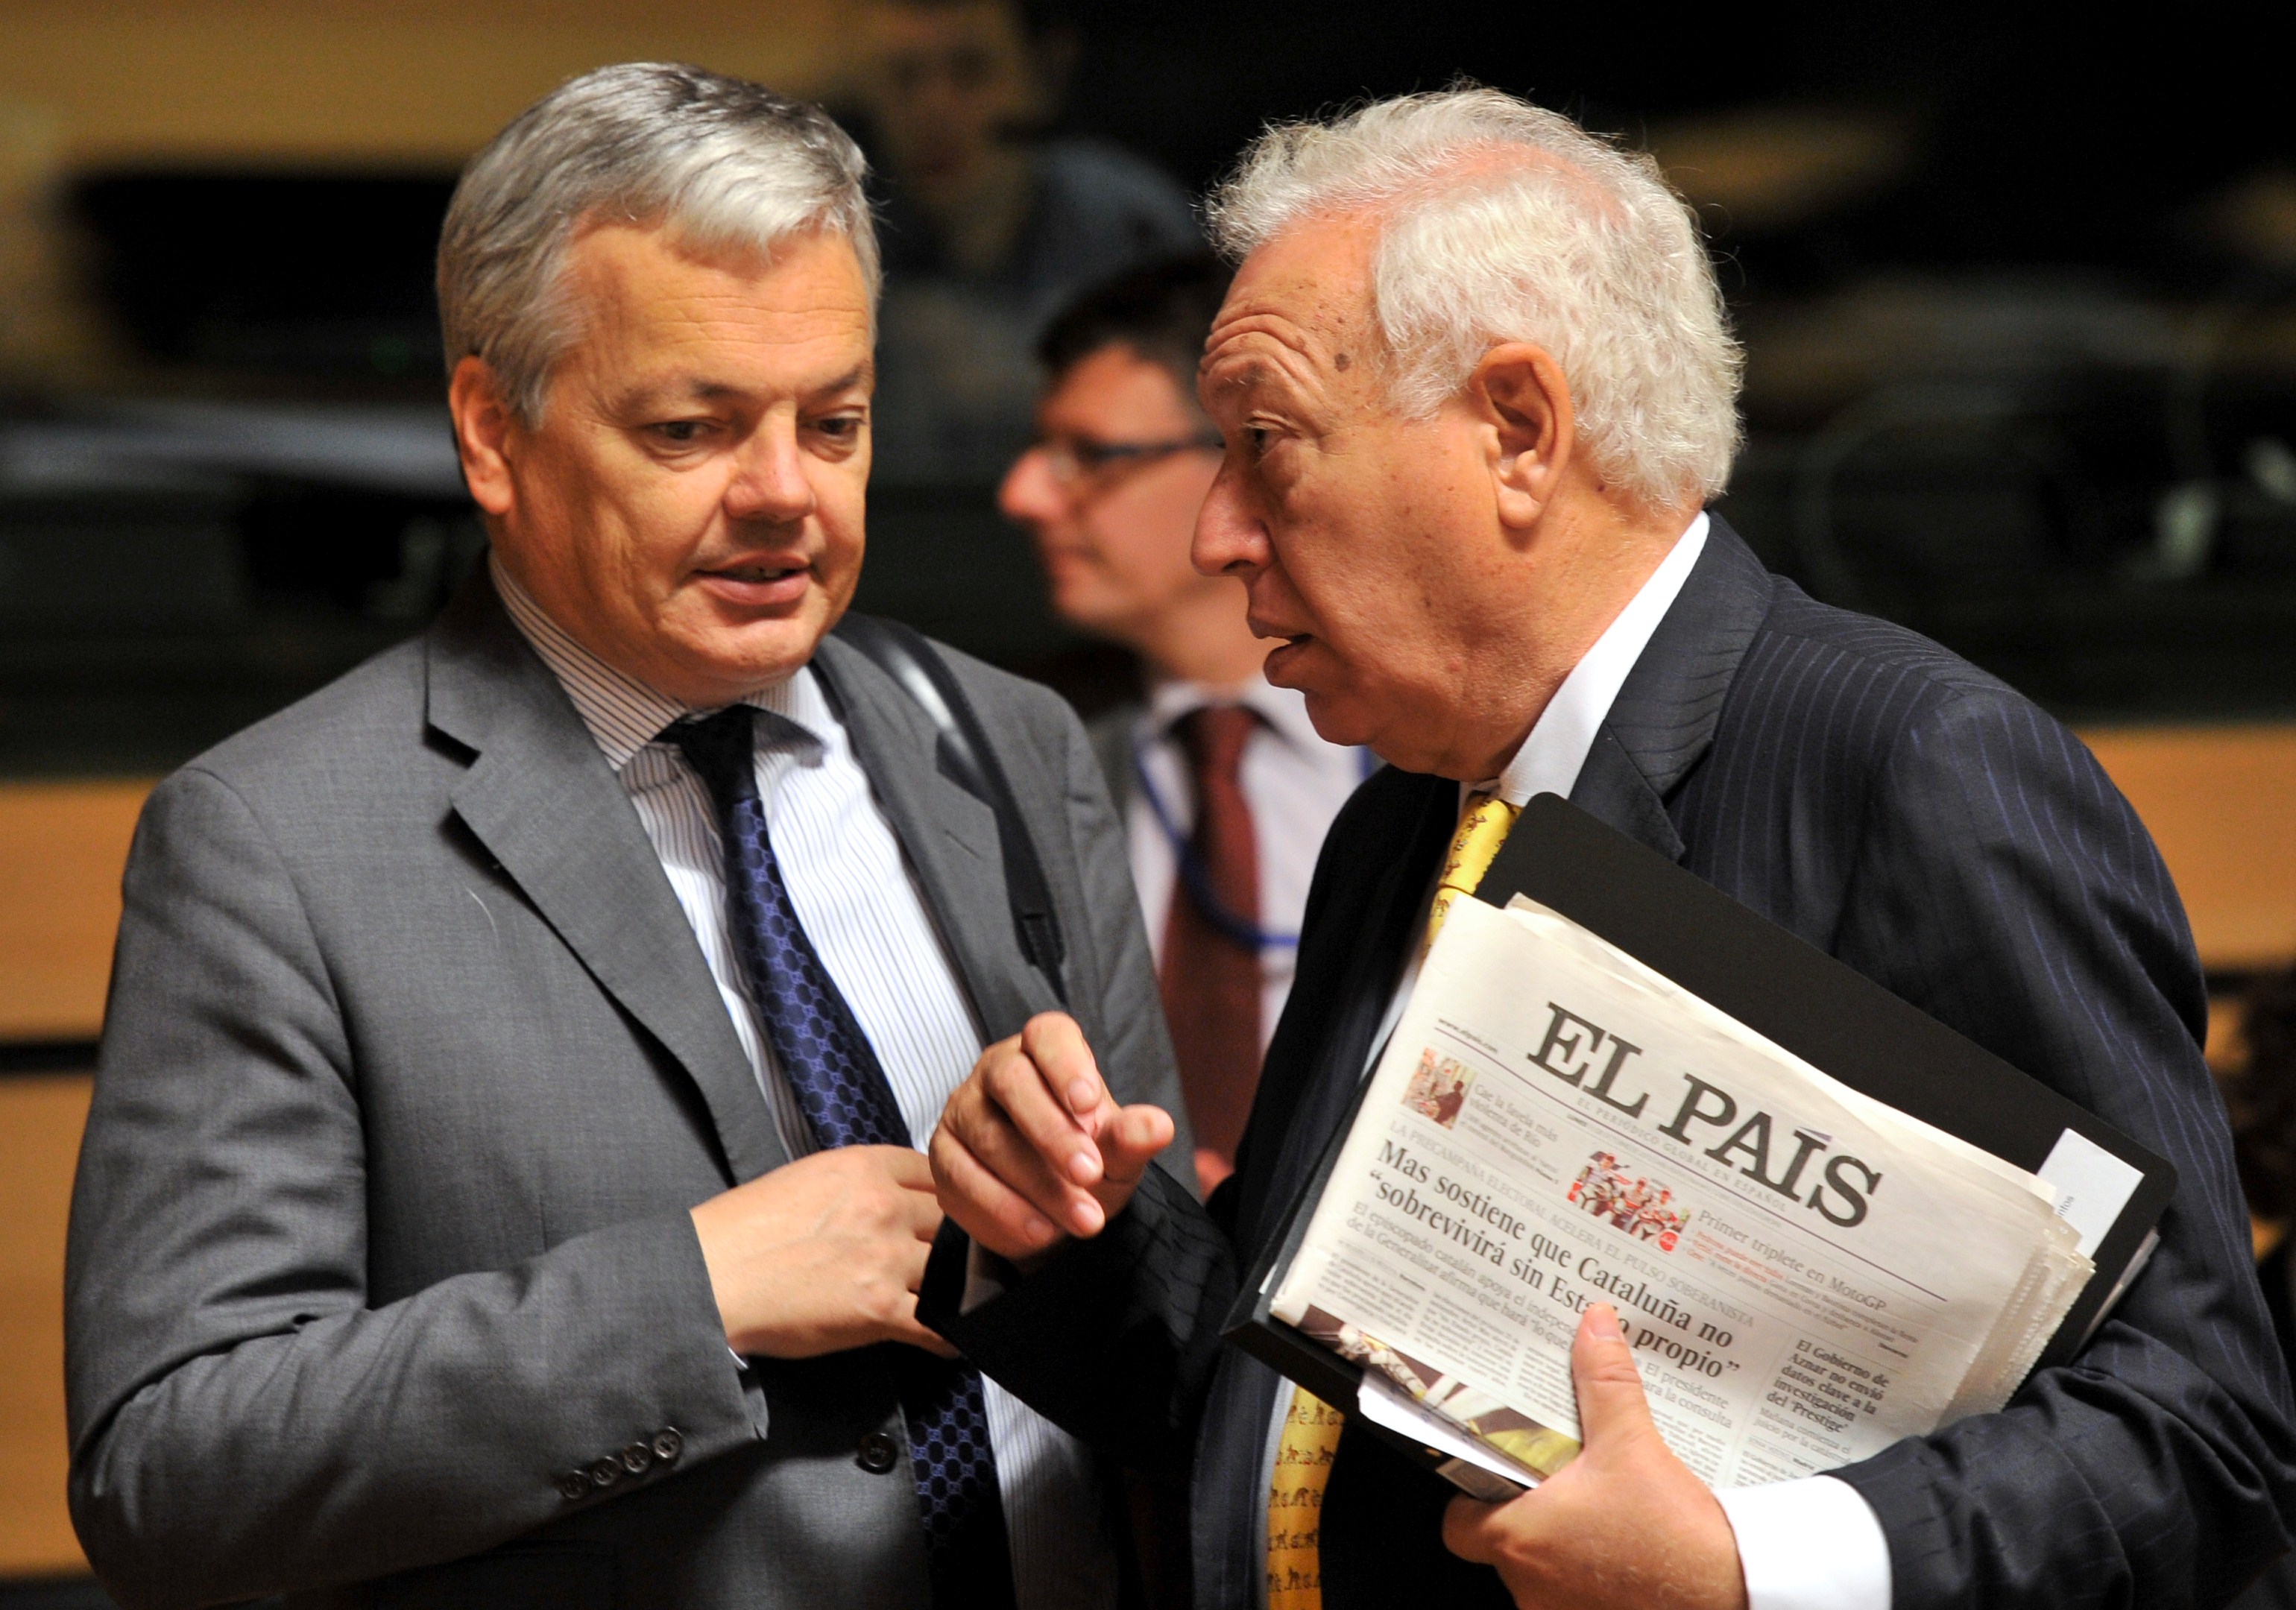 Spanish Foreign minister Jose Manuel Garcia Margallo (R) speaks with Belgian Foreign Minister Didier Reynders (L) before a Foreign Affairs ministers meeting on October 15, 2012 in Luxembourg. (AFP PHOTO / JOHN THYS)